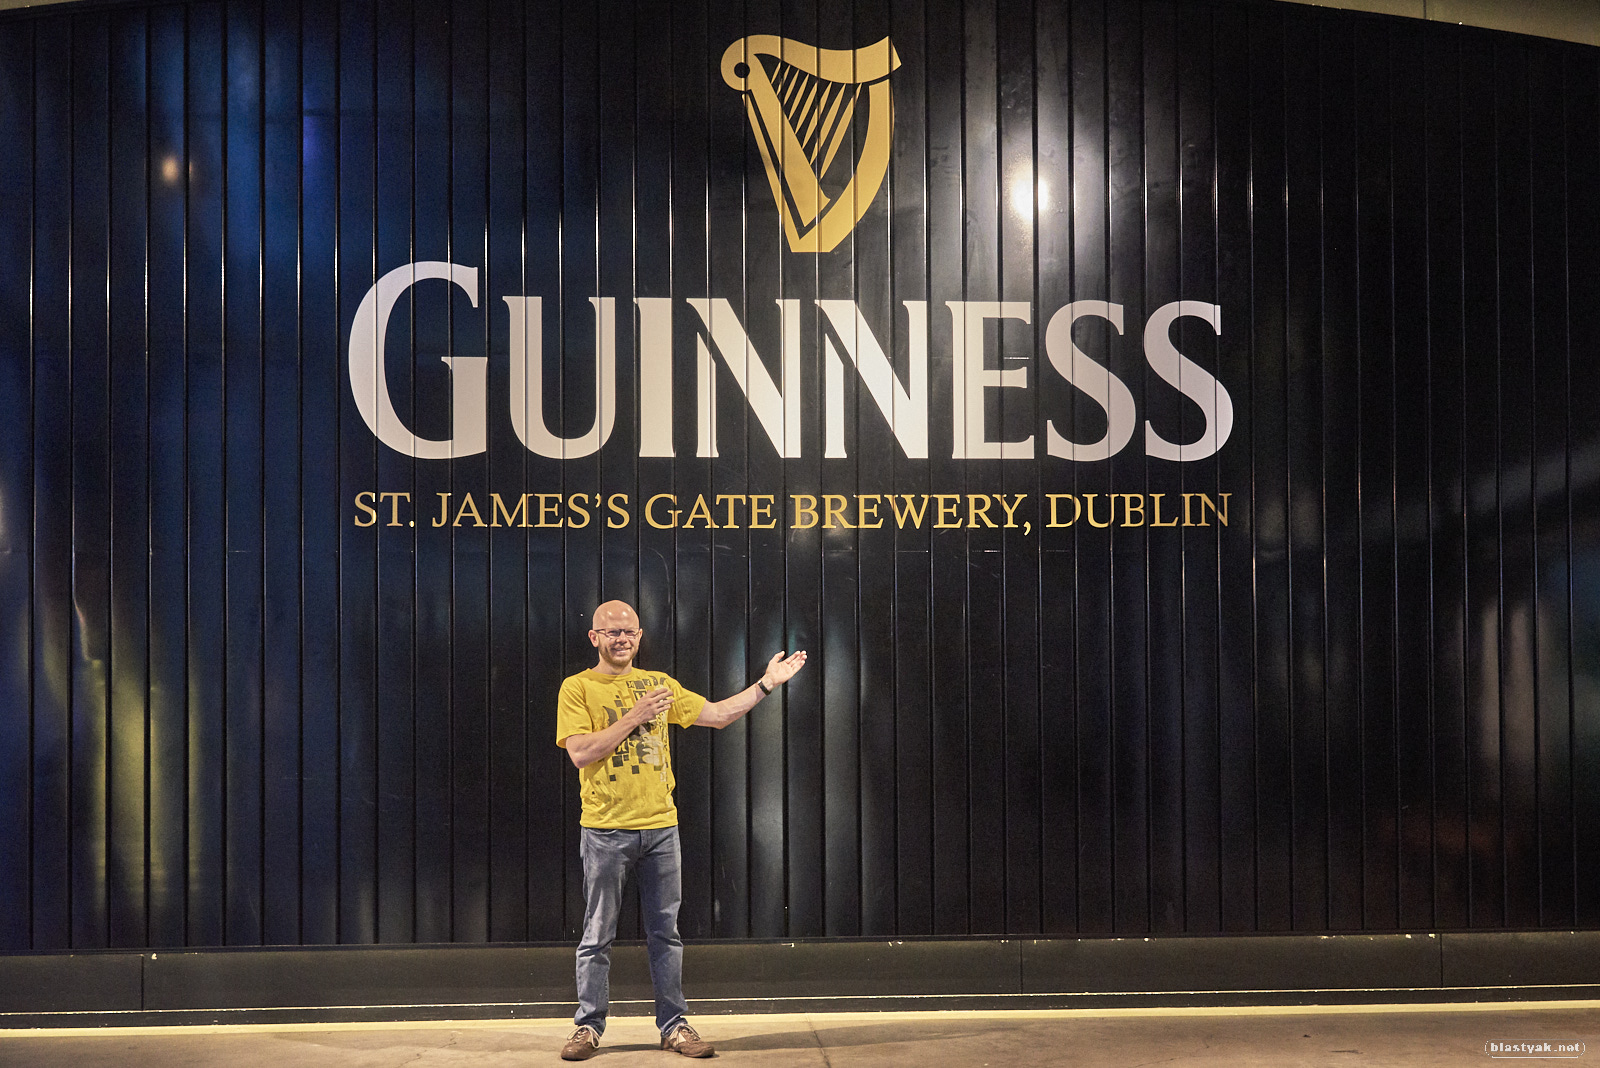 Visiting the Guiness brewery